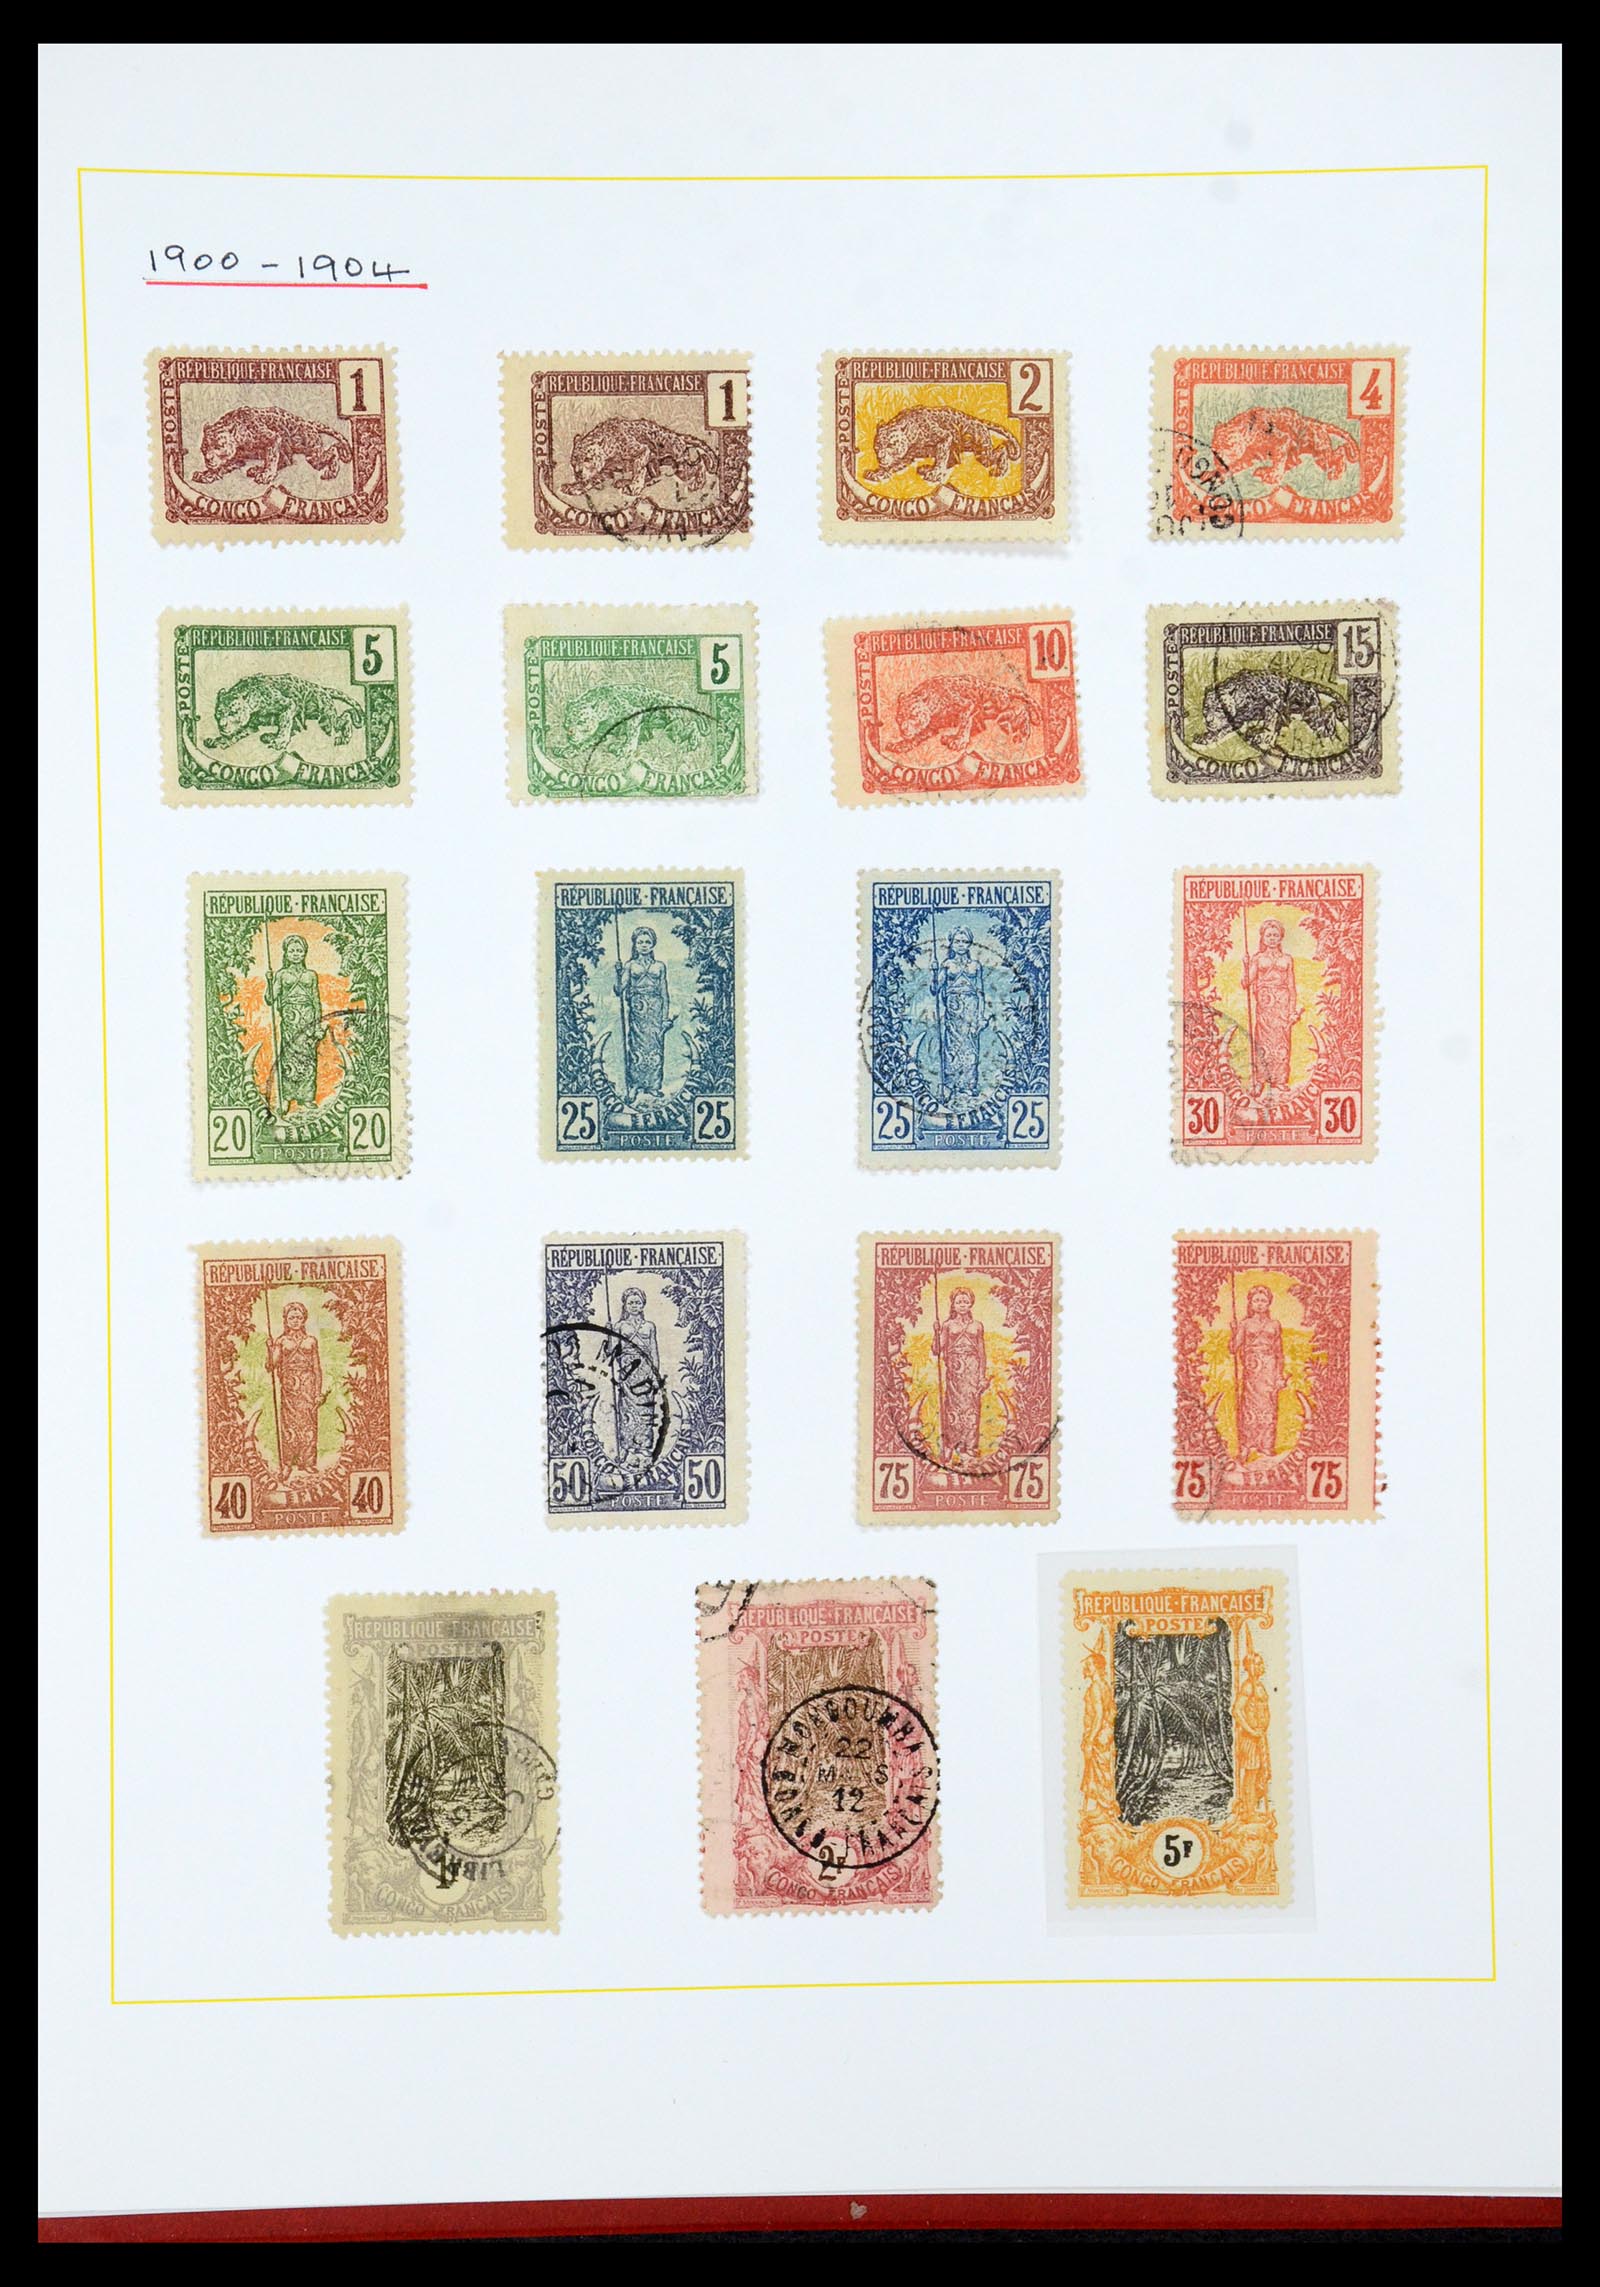 36099 030 - Stamp collection 36099 French coonies 1885-1950.